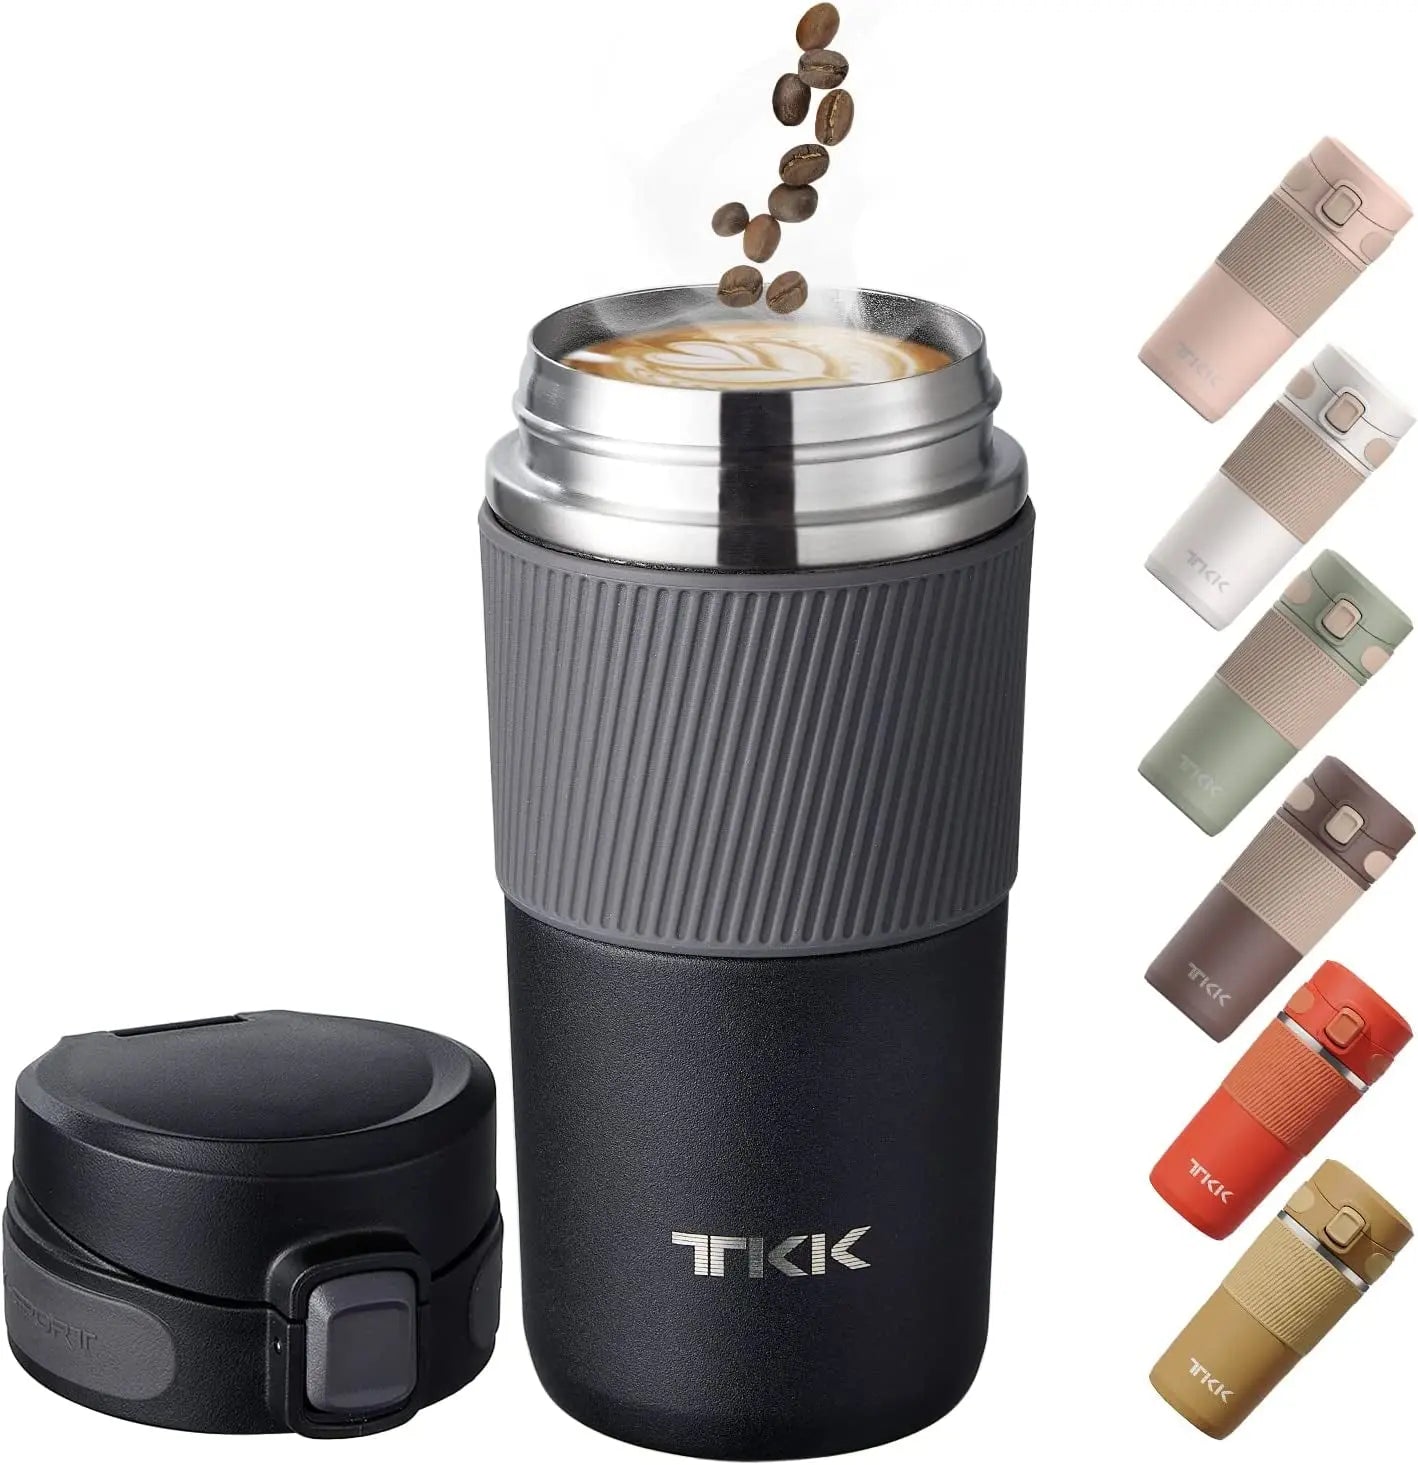 Insulated Coffee Travel Mug Double Wall Leak-Proof Thermos Vacuum Reusable Stainless Steel Tumbler, 15 Oz, Black